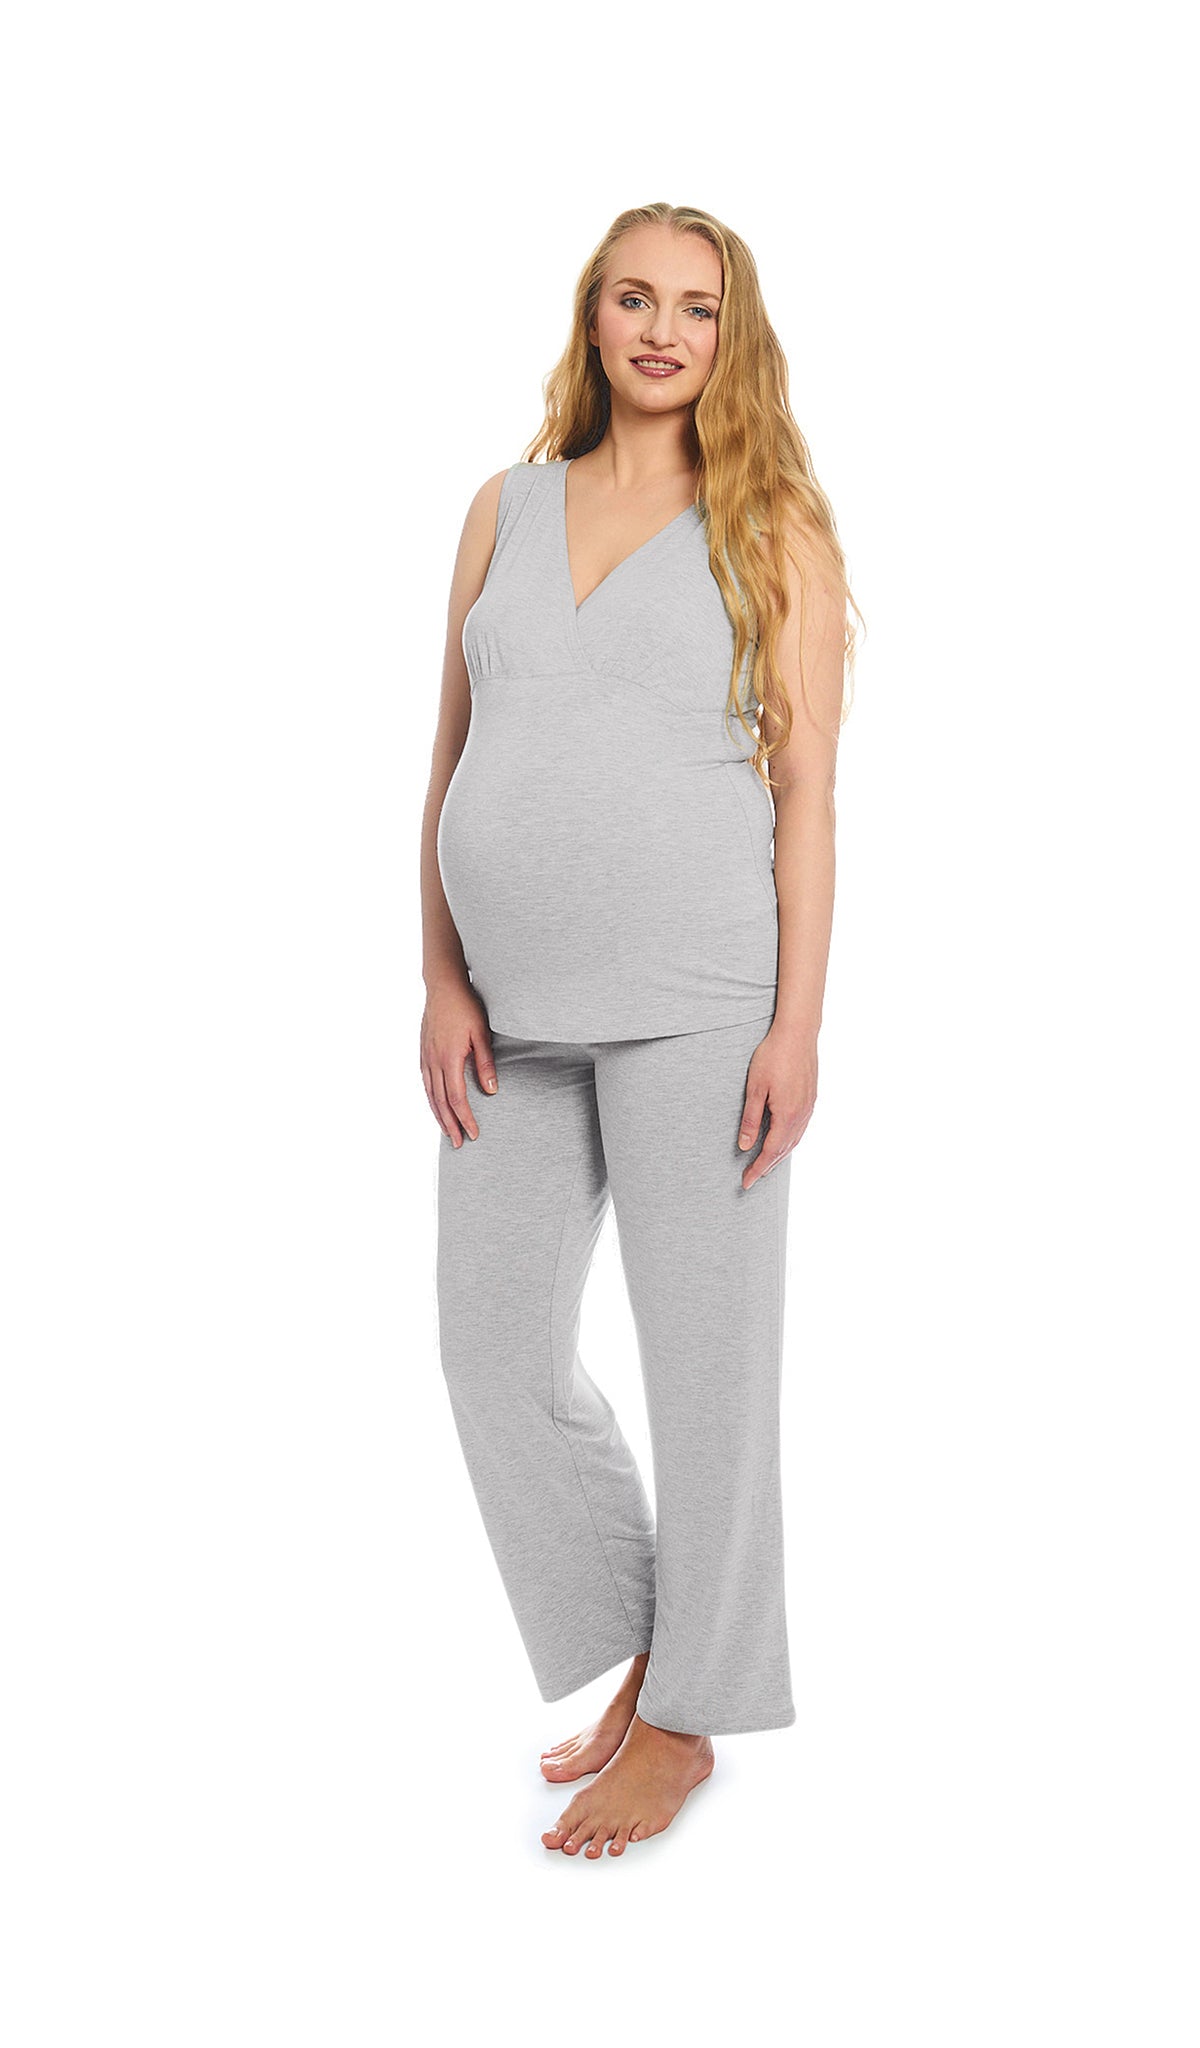 Heather Grey Solid Analise 5-Piece Set, pregnant woman wearing criss-cross bust tank top and pant.